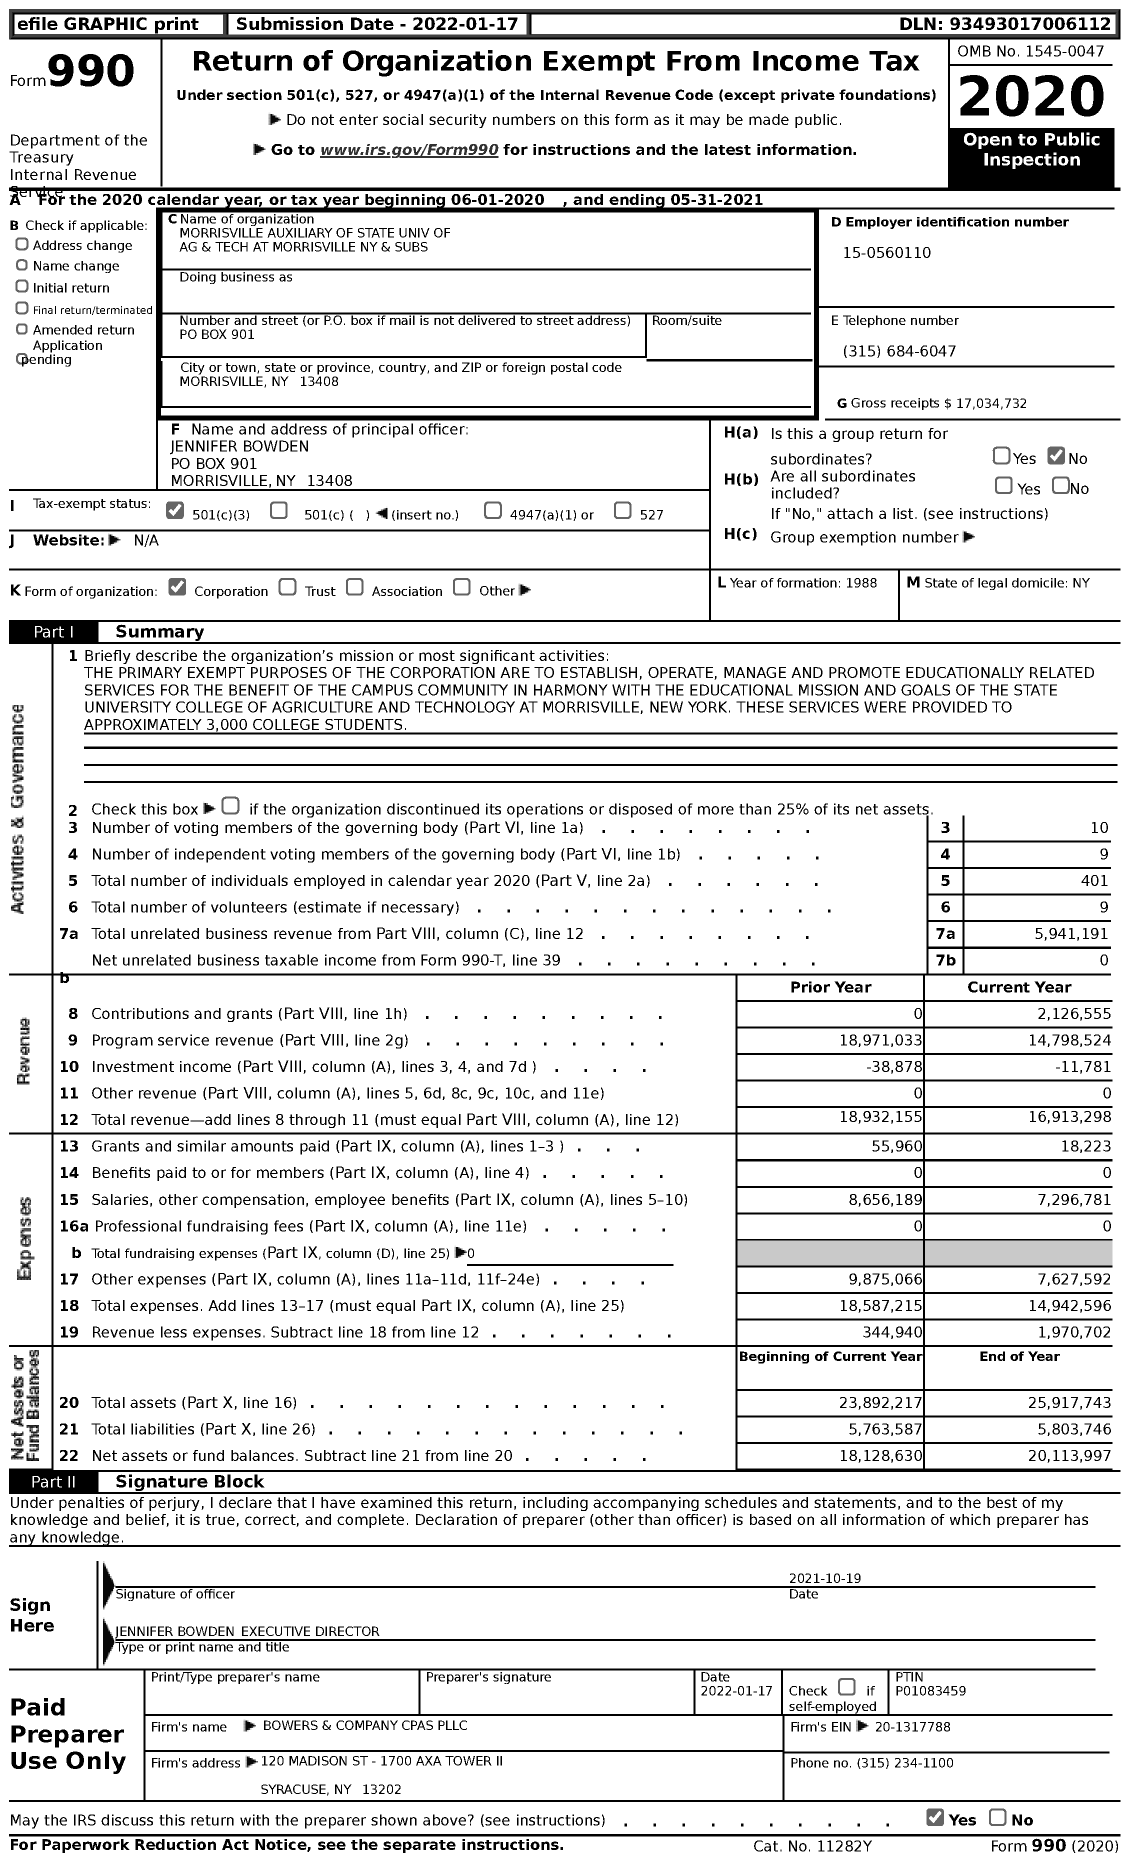 Image of first page of 2020 Form 990 for Morrisville Auxiliary of State Univ of Ag and Tech at Morrisville Ny and Subs